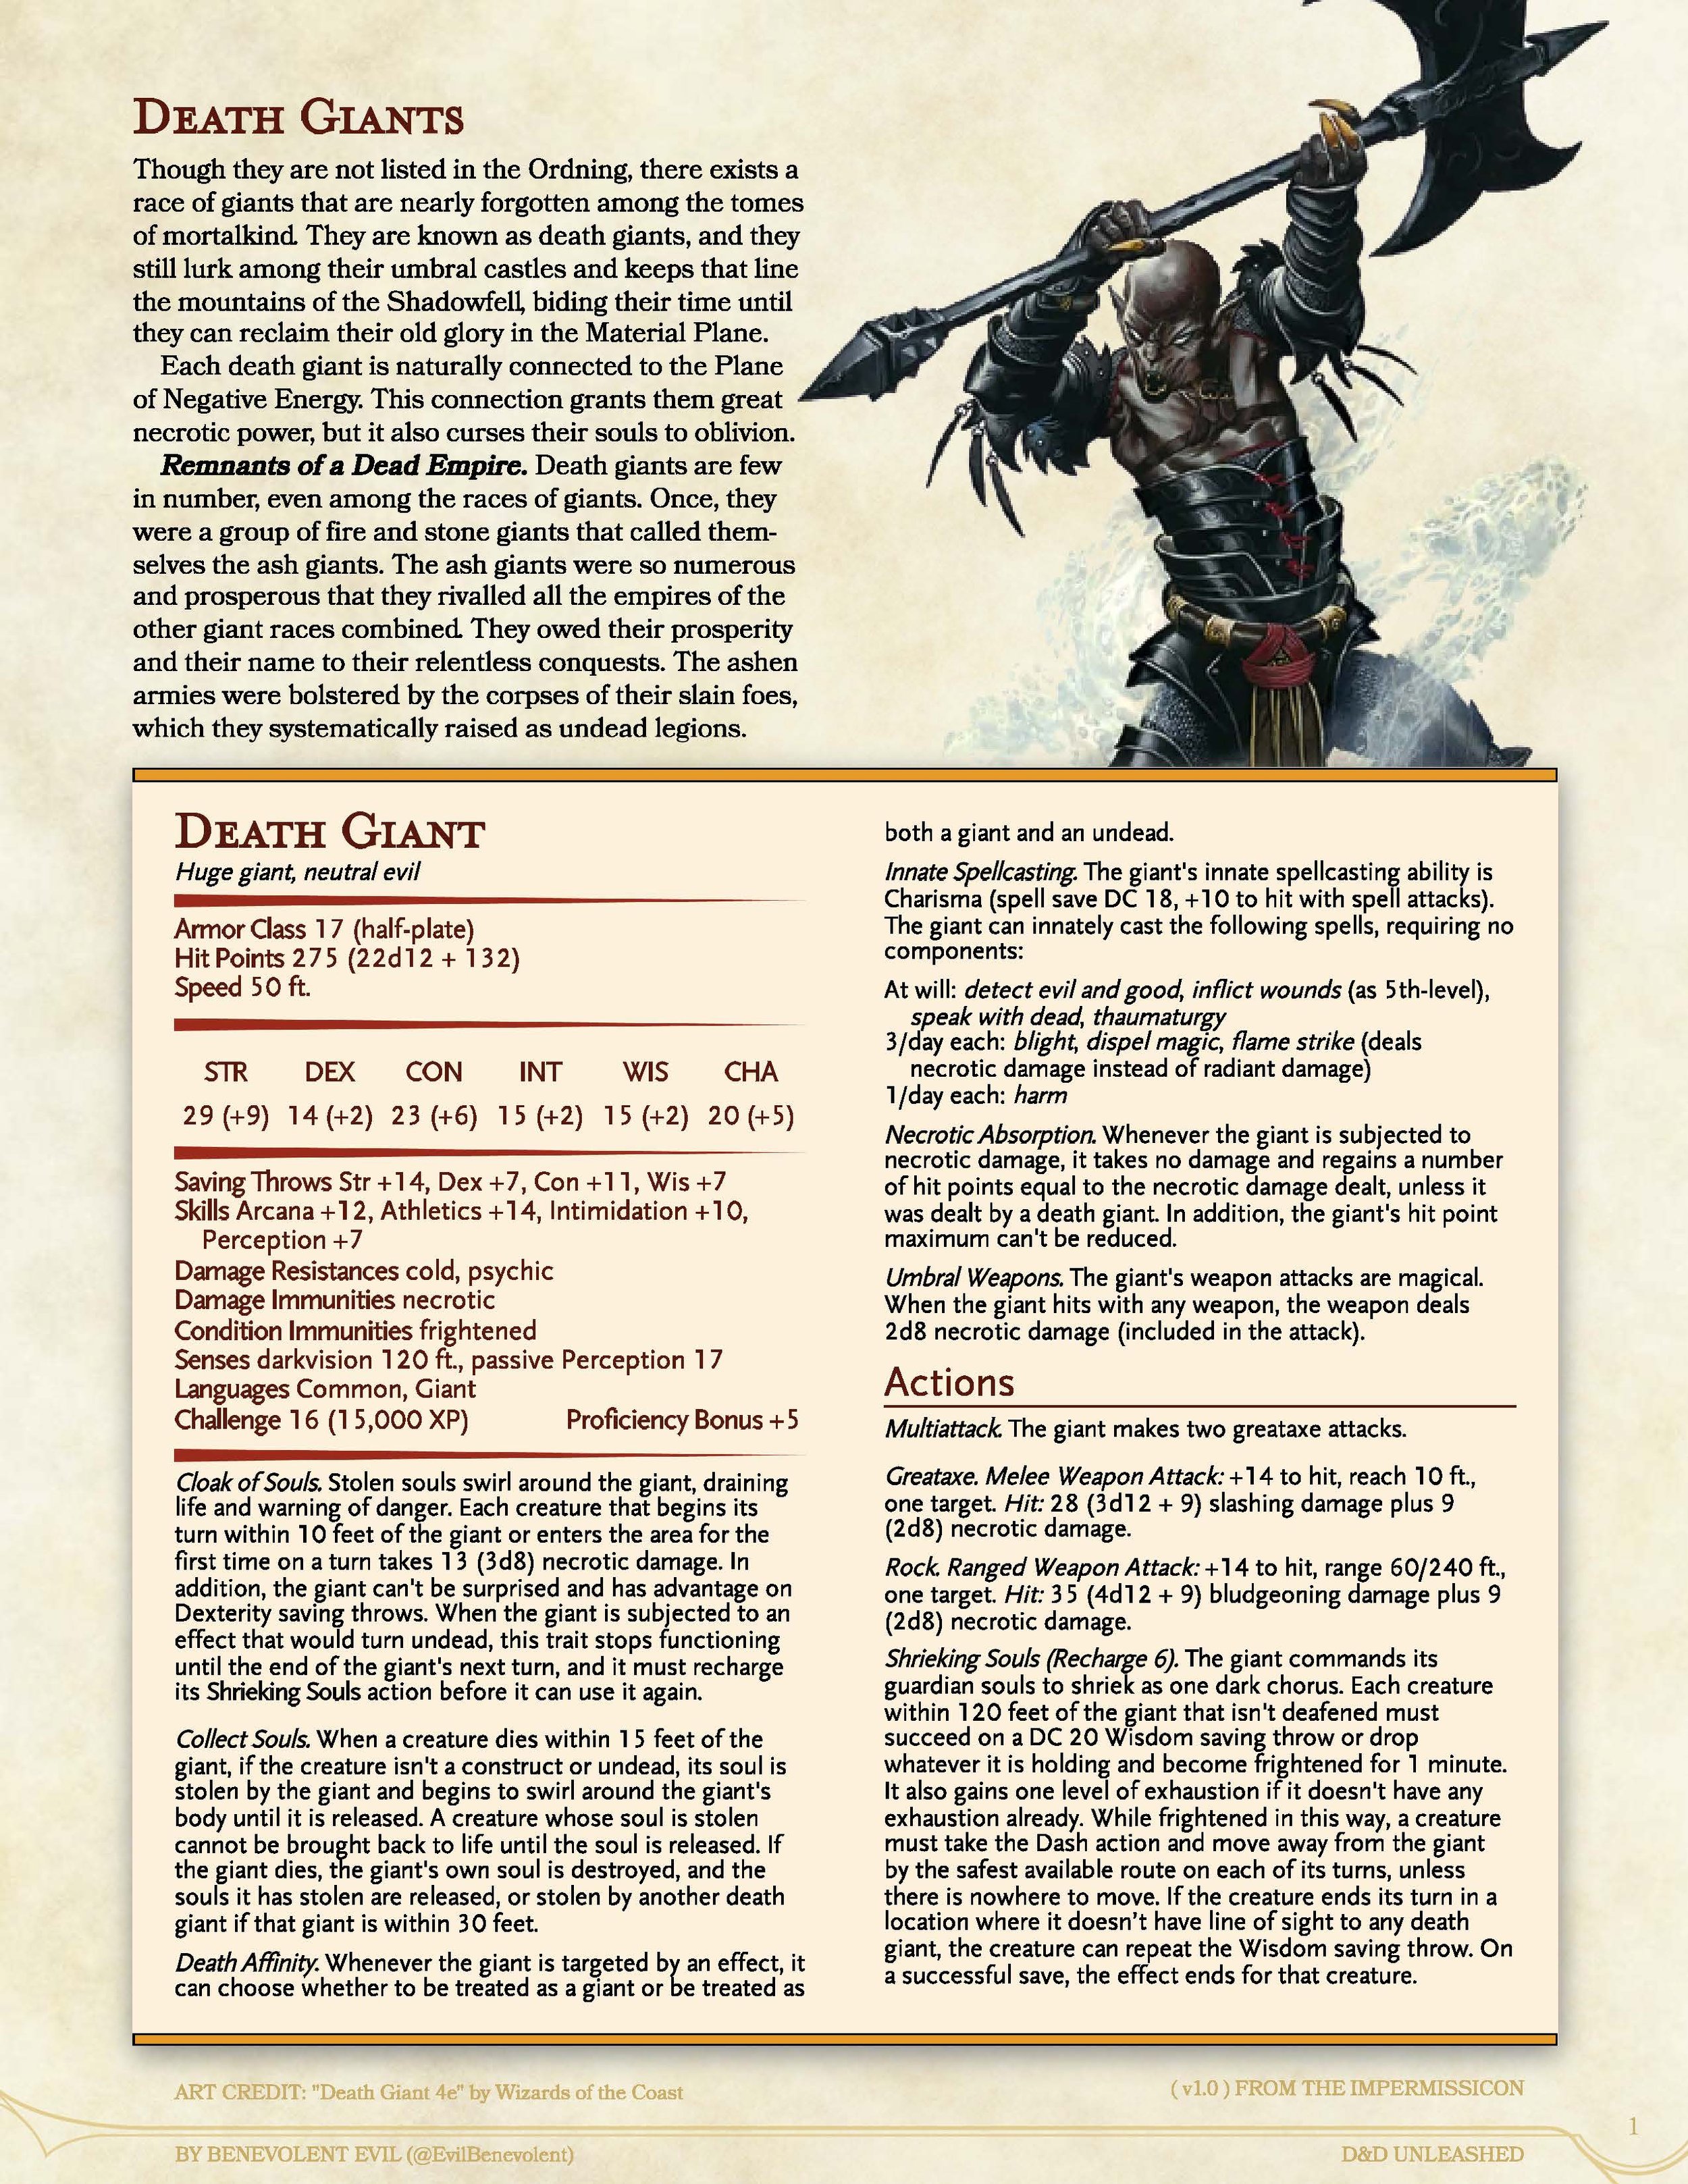 D&D Unleashed - Death Giants and Giant Undead (v1_0)_Page_1.jpg